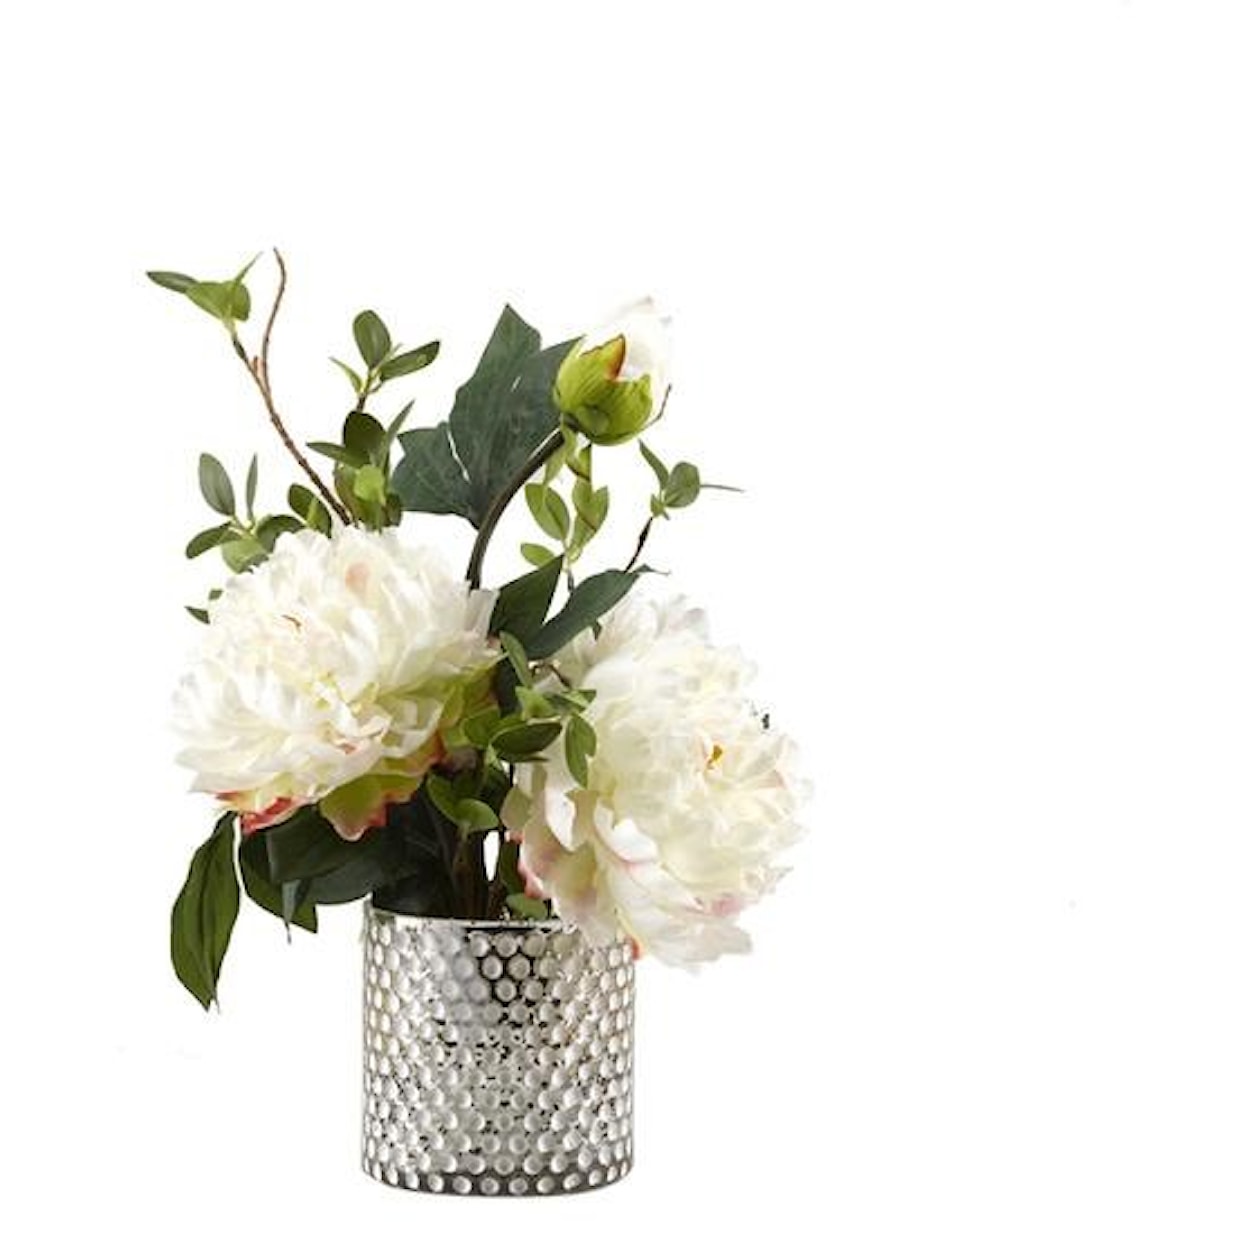 D&W Silks Florals and Botanicals Large White Peonies In Vase